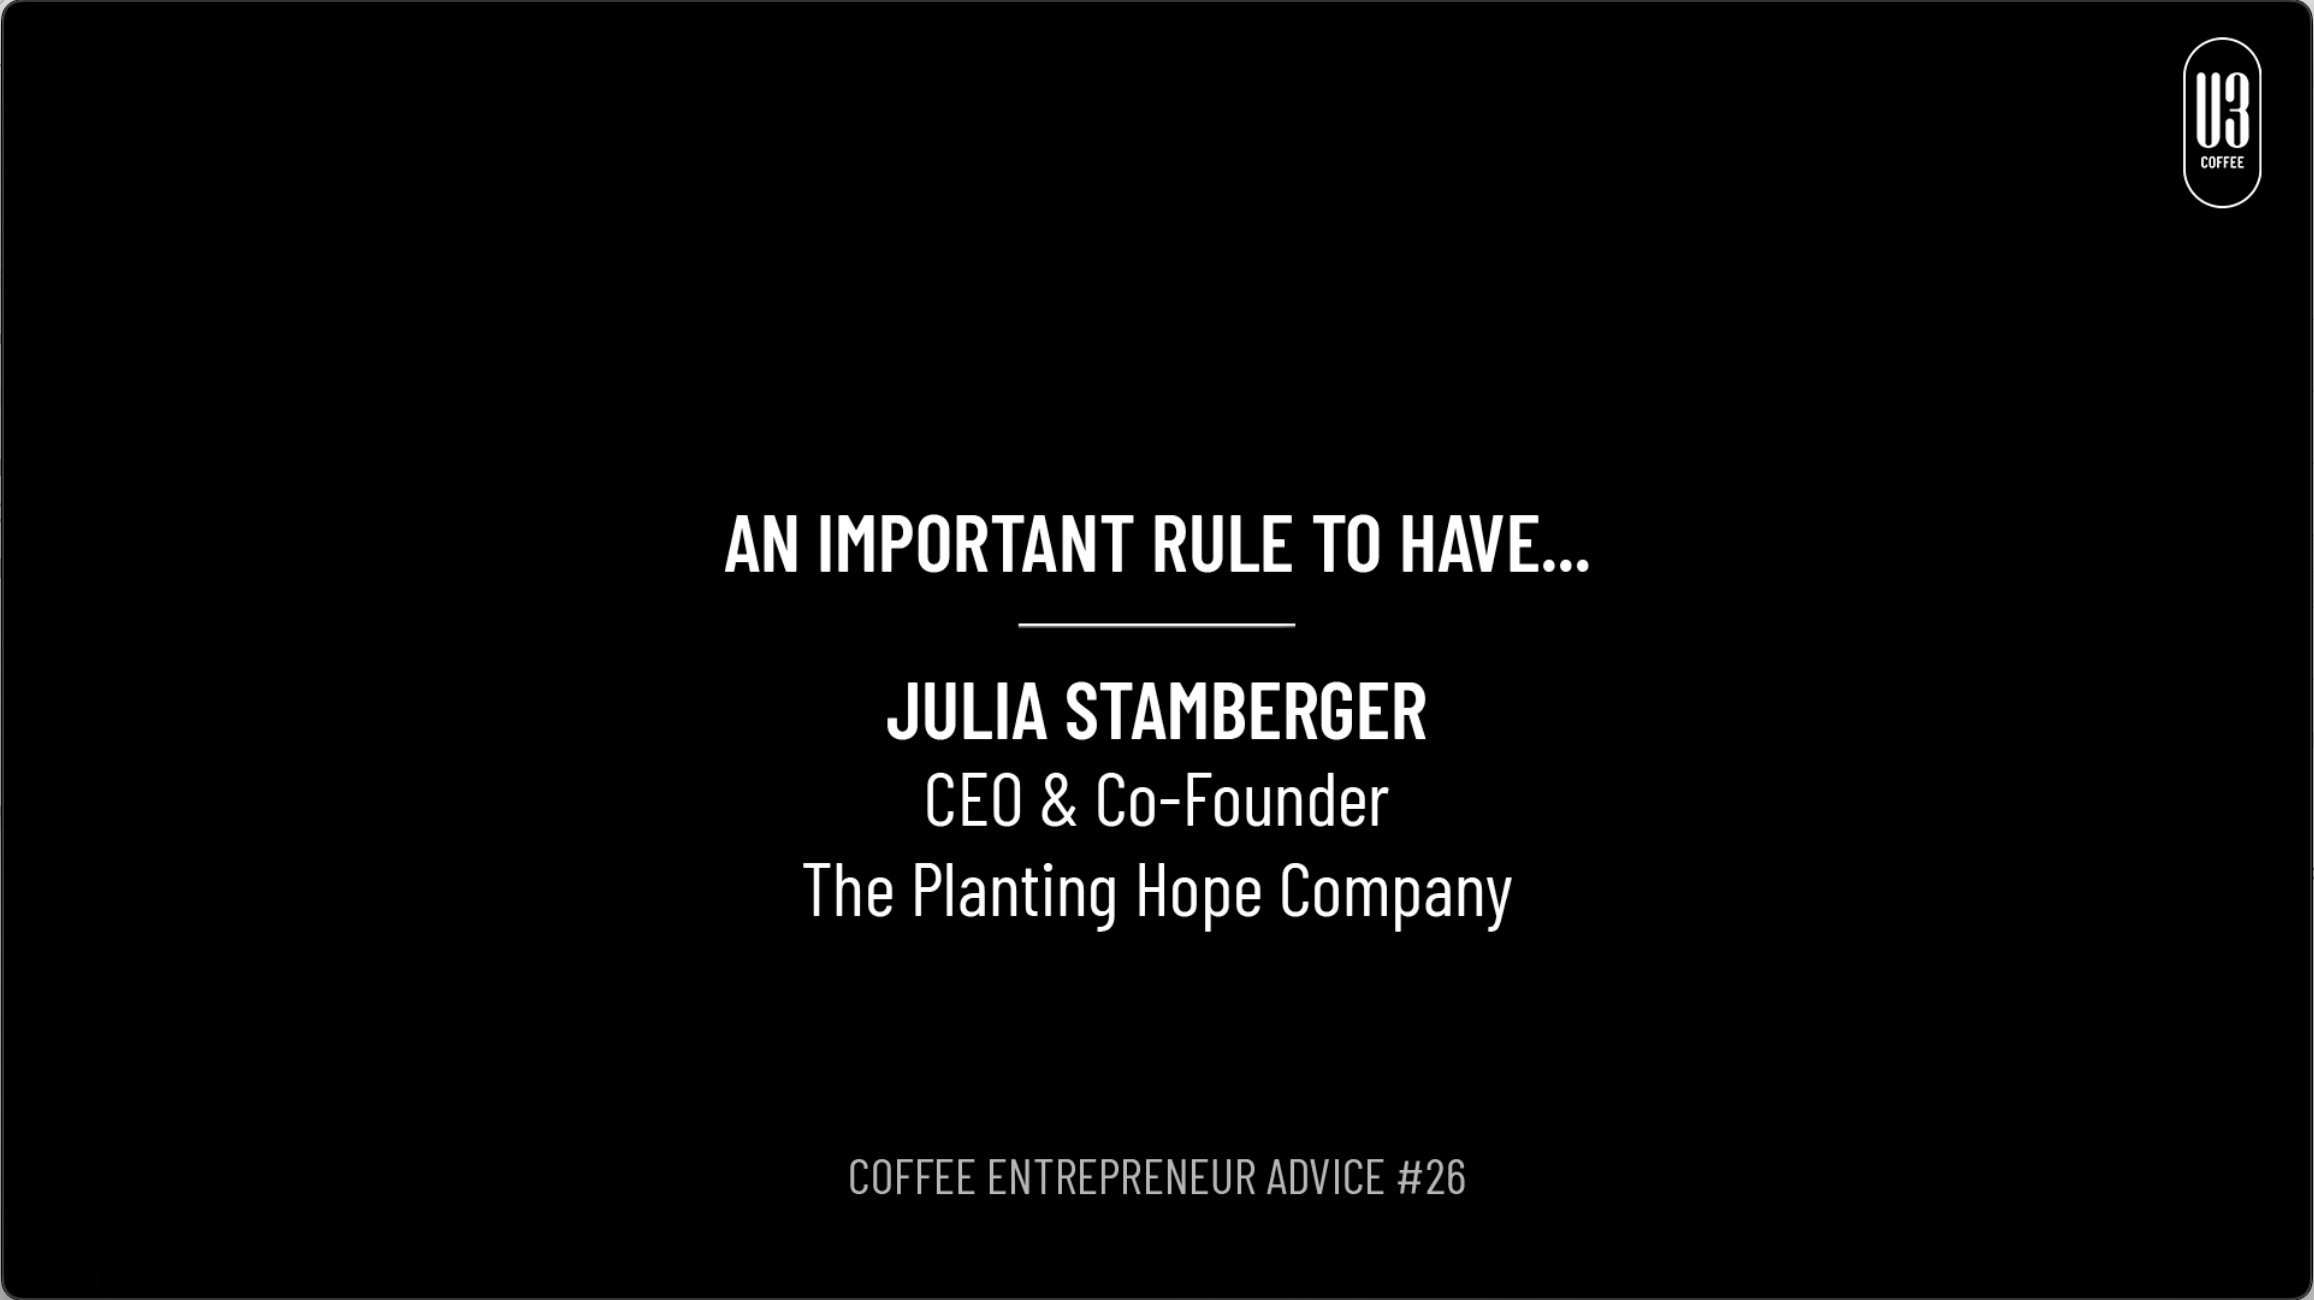 #26 Coffee Entrepreneur Advice: Julia Stamberger, CEO & Co-Founder of The Planting Hope Company gives her advice on an important rule to have.